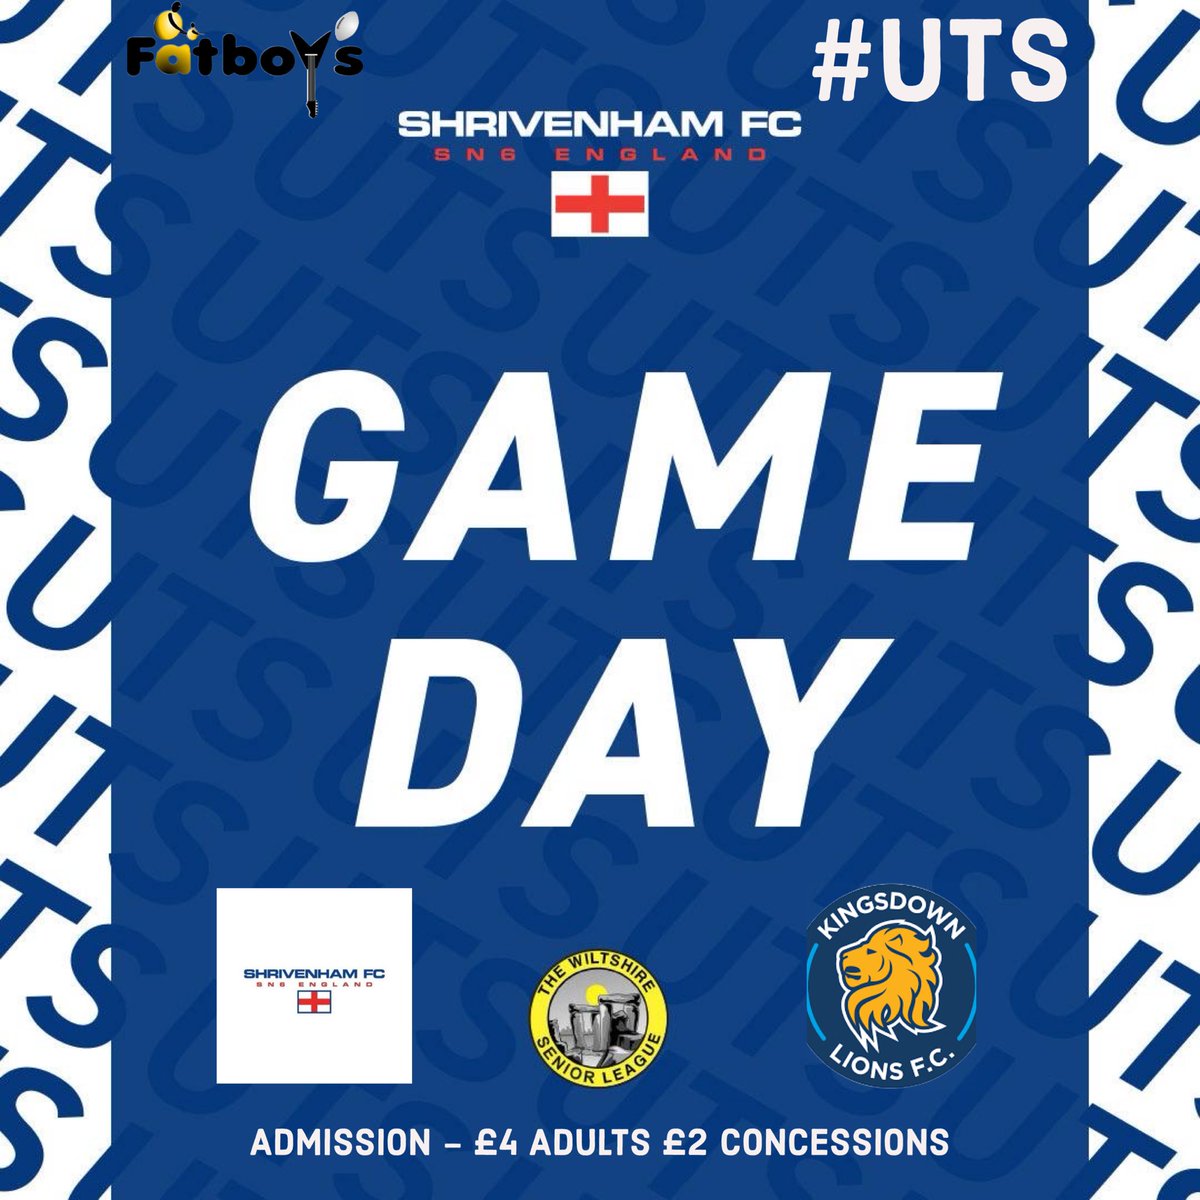 🔵⚪️GAME DAY🔵⚪️ The boys are back in action today as we welcome @Kingsdownlions to the Ian Richardson Ground. 🆚 @Kingsdownlions 🏆Wiltshire Senior League ⌚️ 15:00 📍RECREATION GROUND, SHRIVENHAM, SWINDON, Oxfordshire SN6 8BJ #UTS @WiltsLeague @OxOnFootball @YSswindon